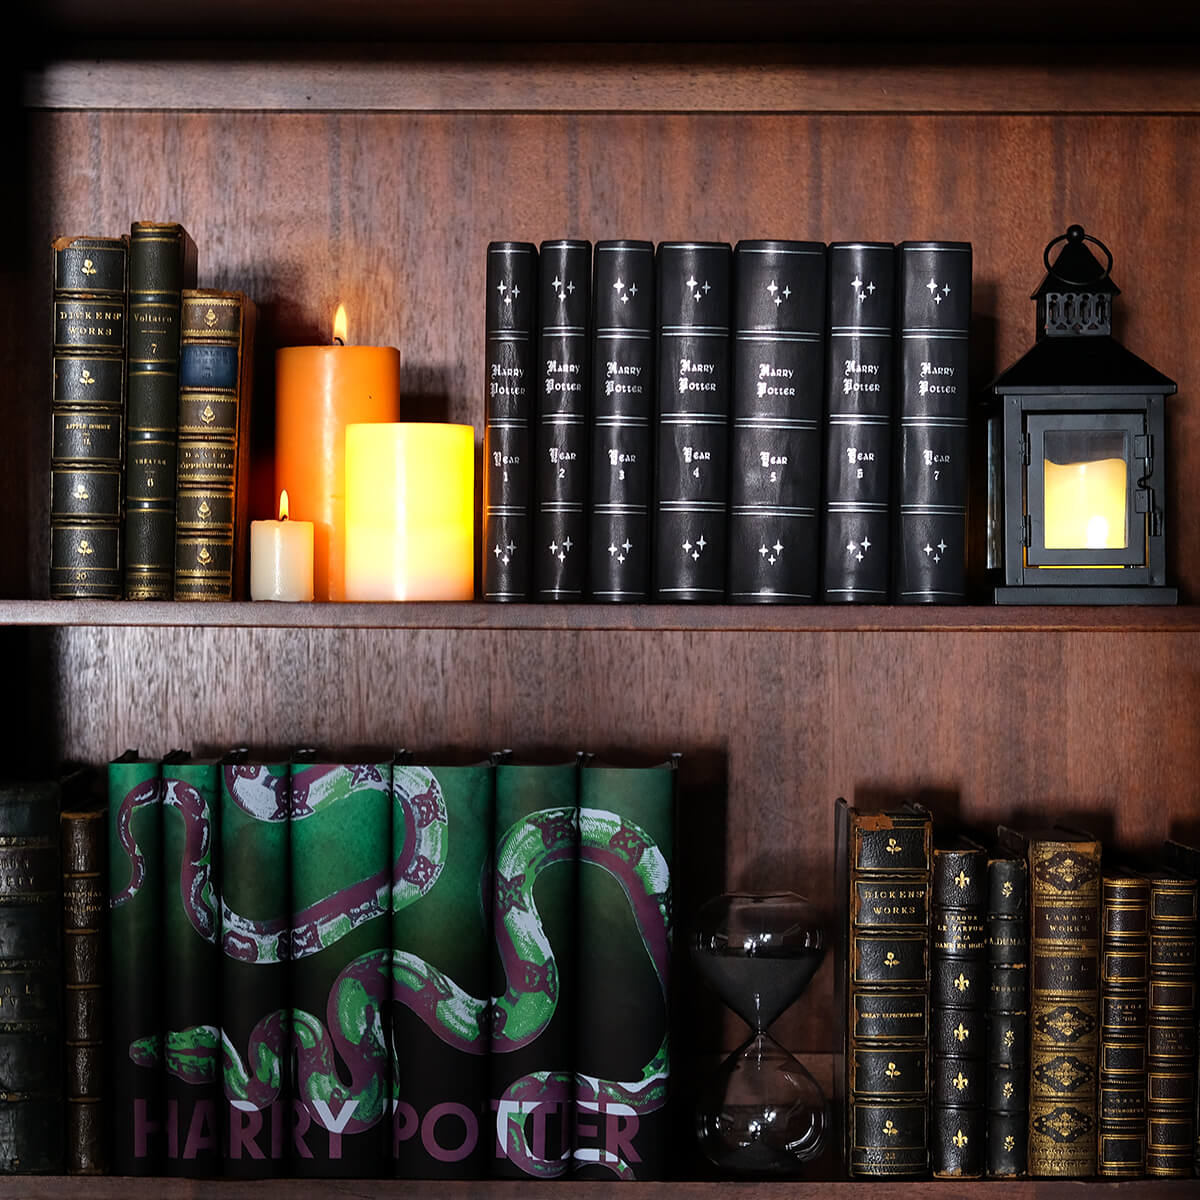 Genuine black leather Harry Potter from Juniper Books with silver book titles, silver ornaments, and silver stars on the spines.